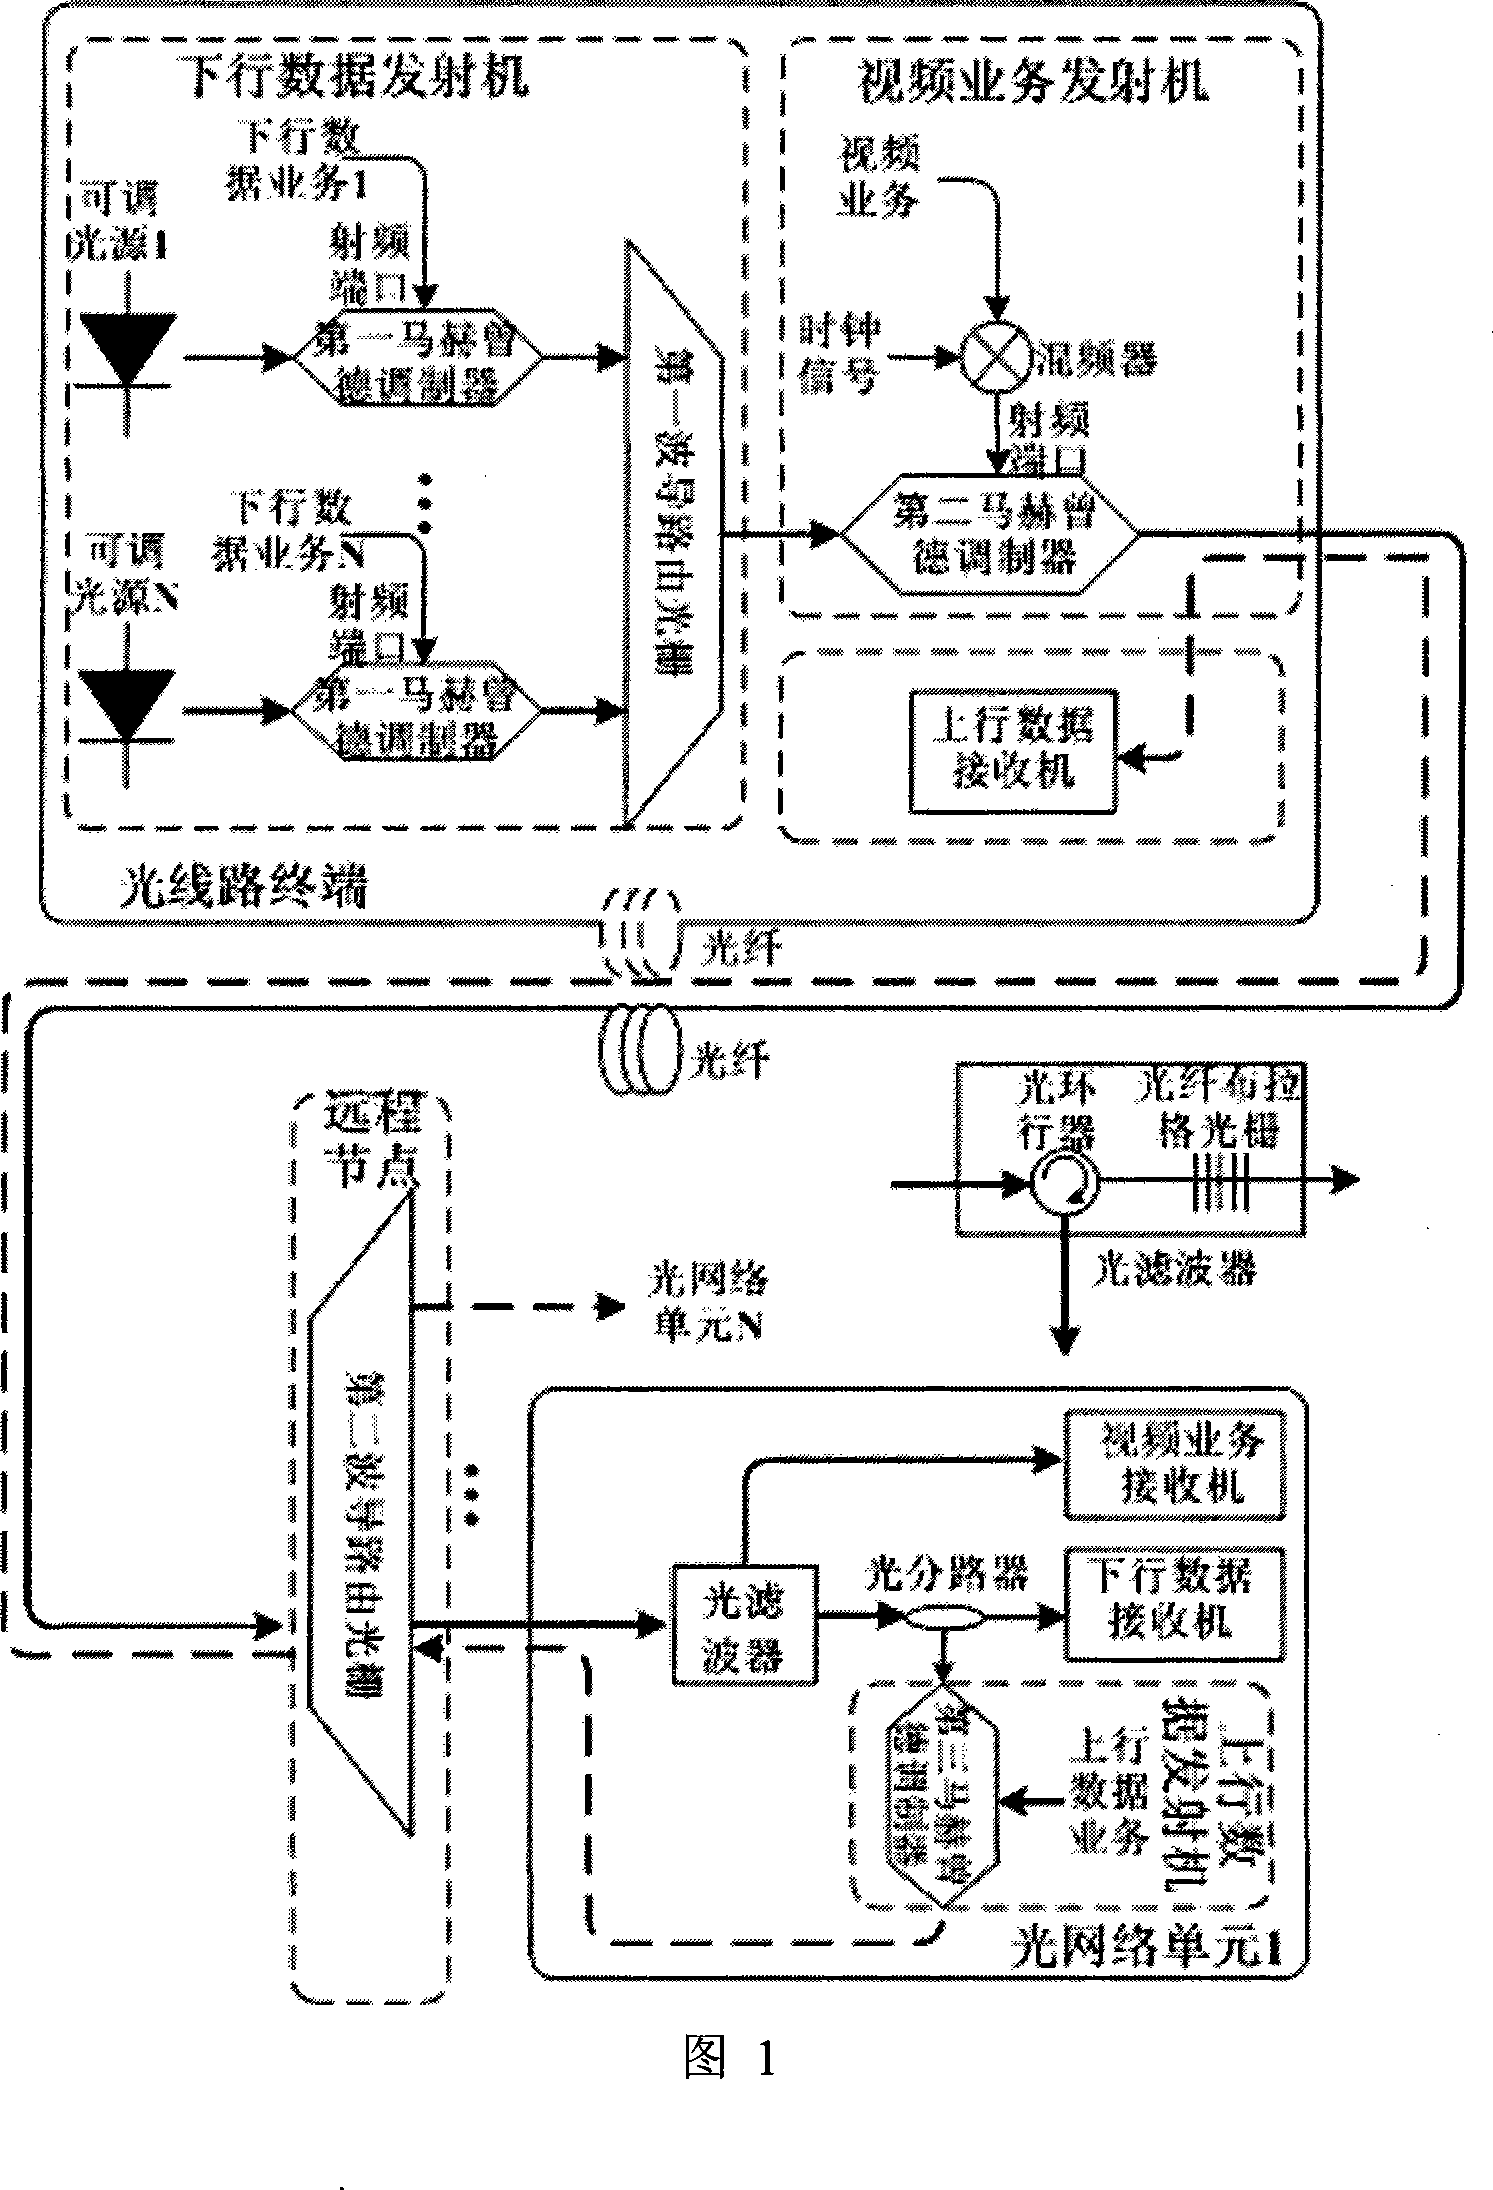 Apparatus and method for selectively transmitting video business in wavelength division multiplexing passive optical network